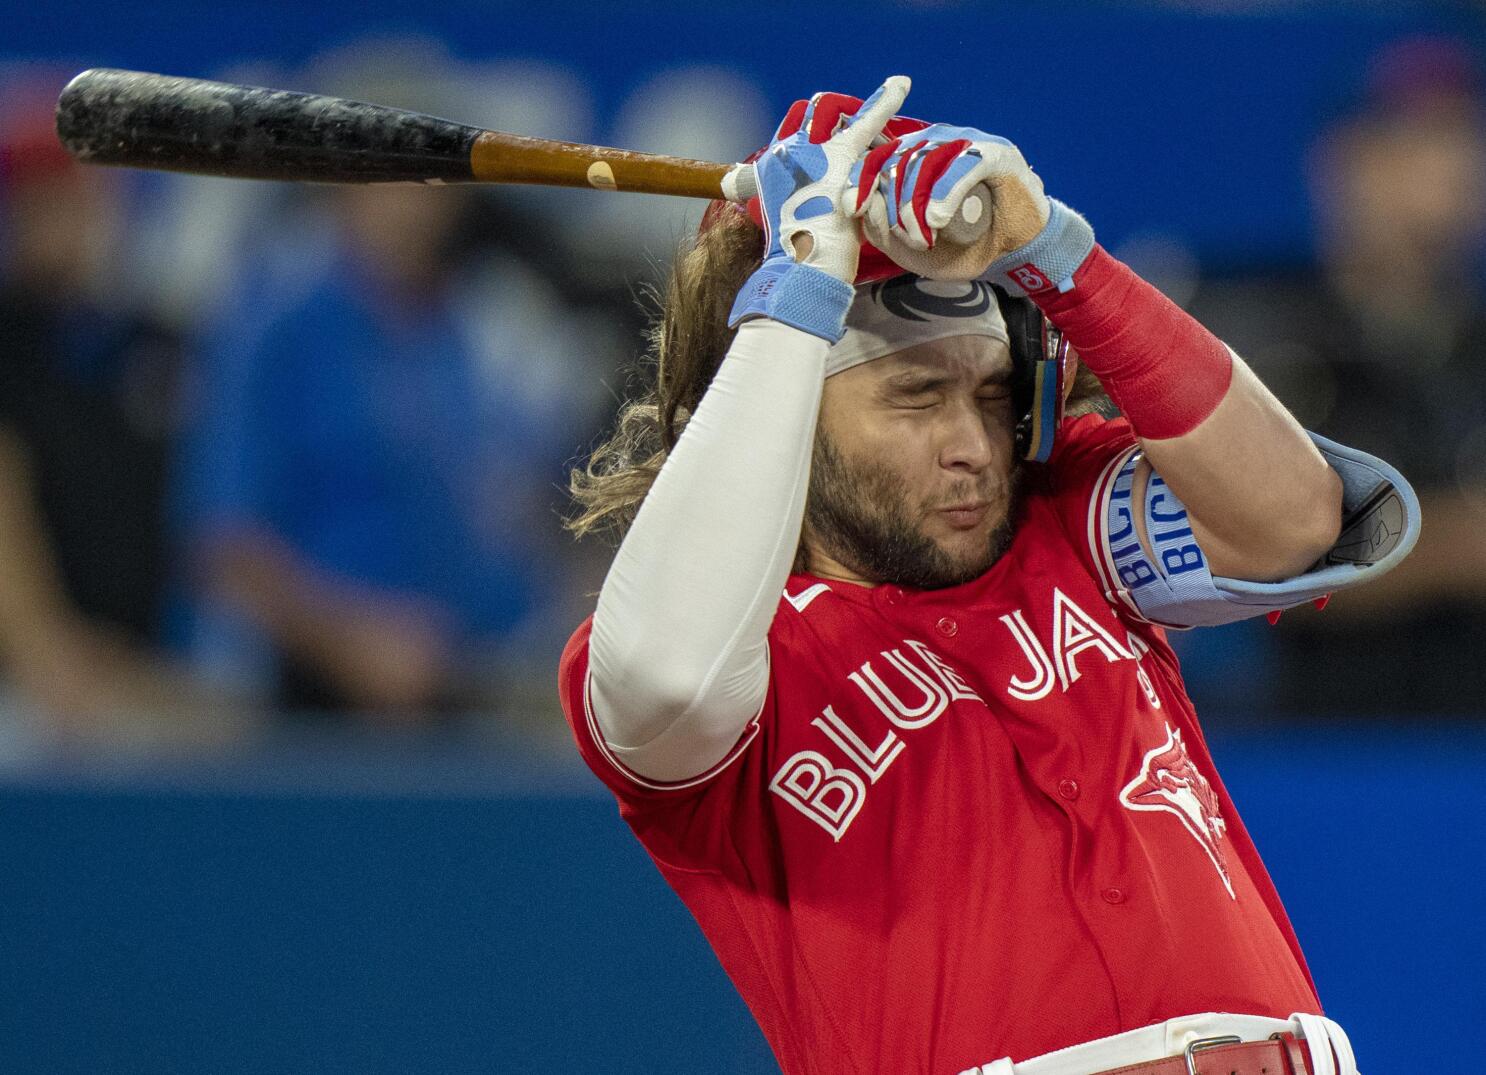 Bichette late HR, Jays edge Rays in testy contender matchup